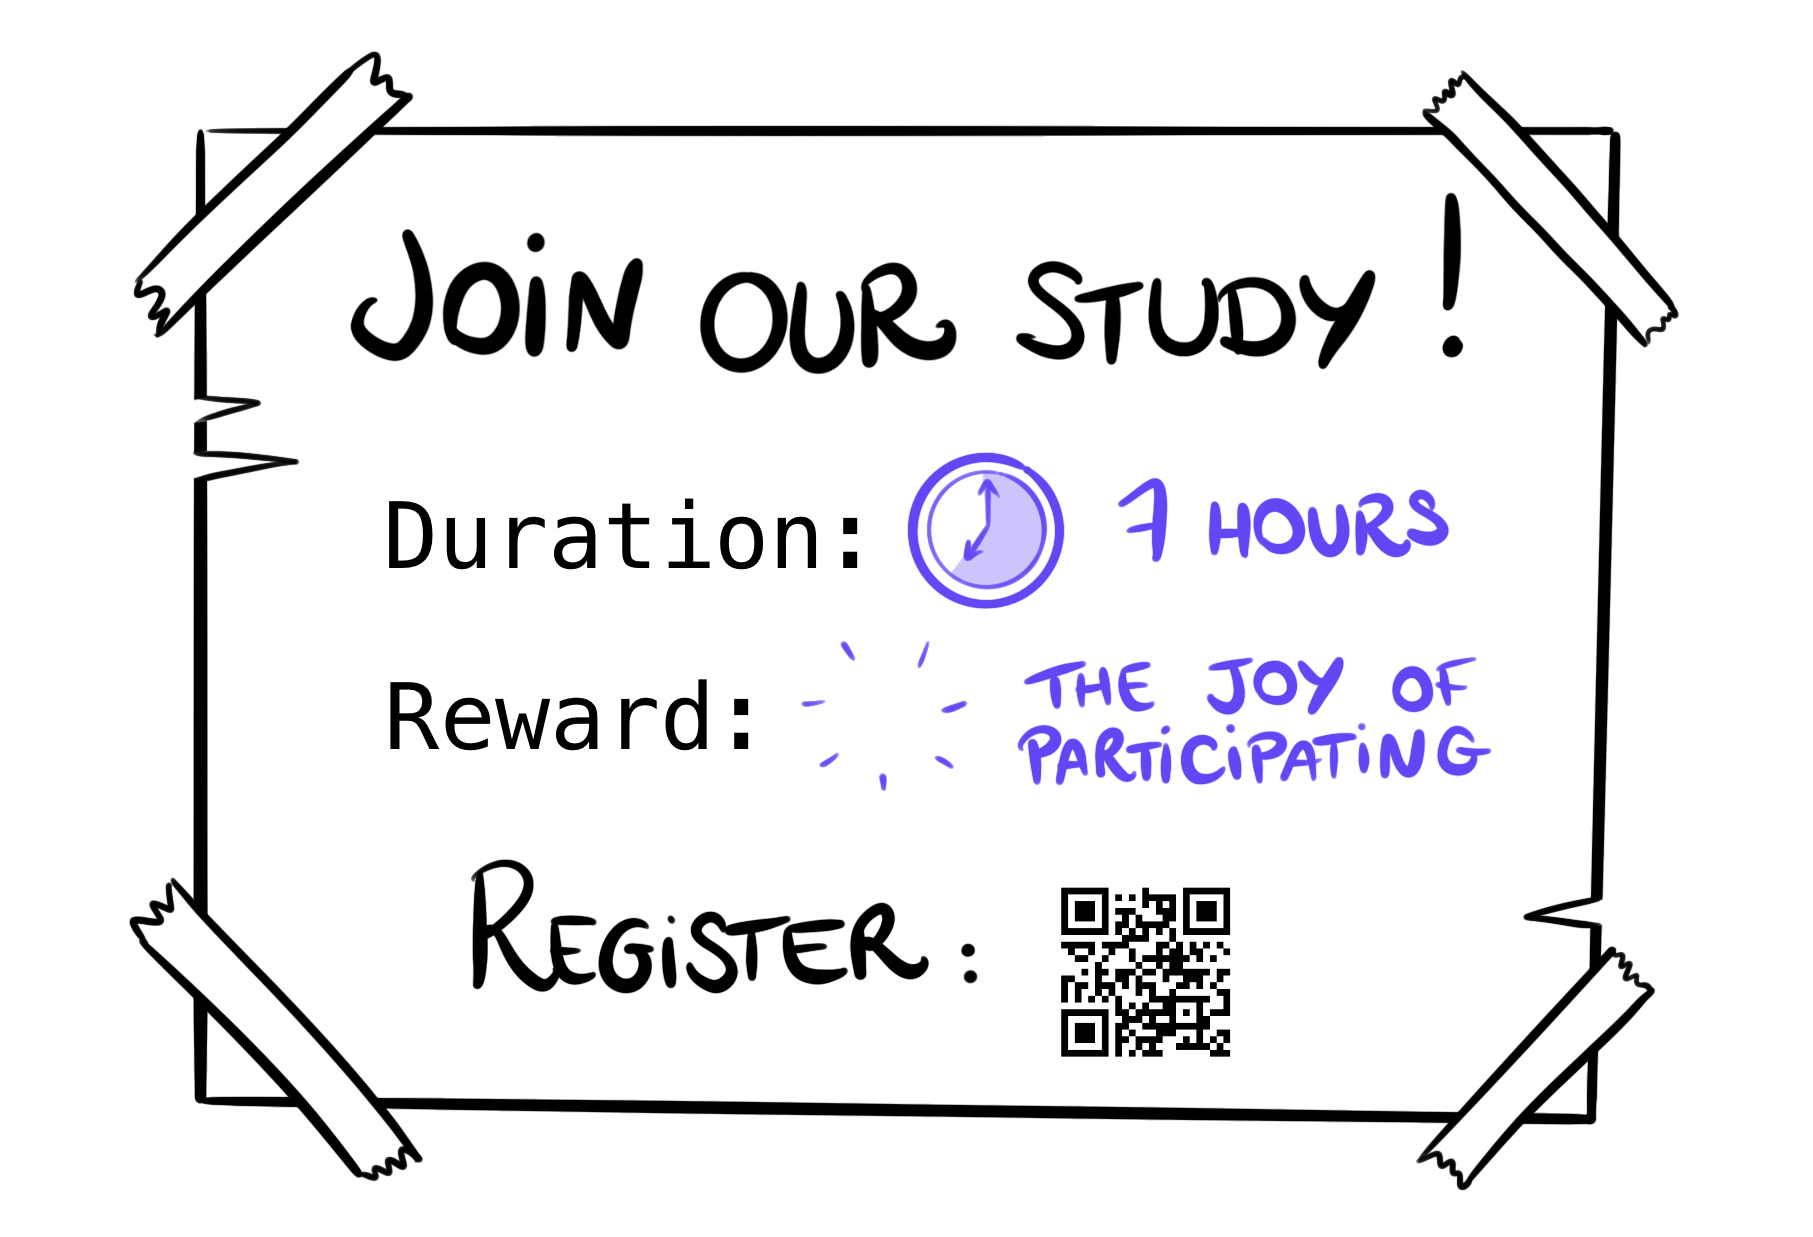 A flyer for a 7 hours user study where the reward is only the joy of participating.